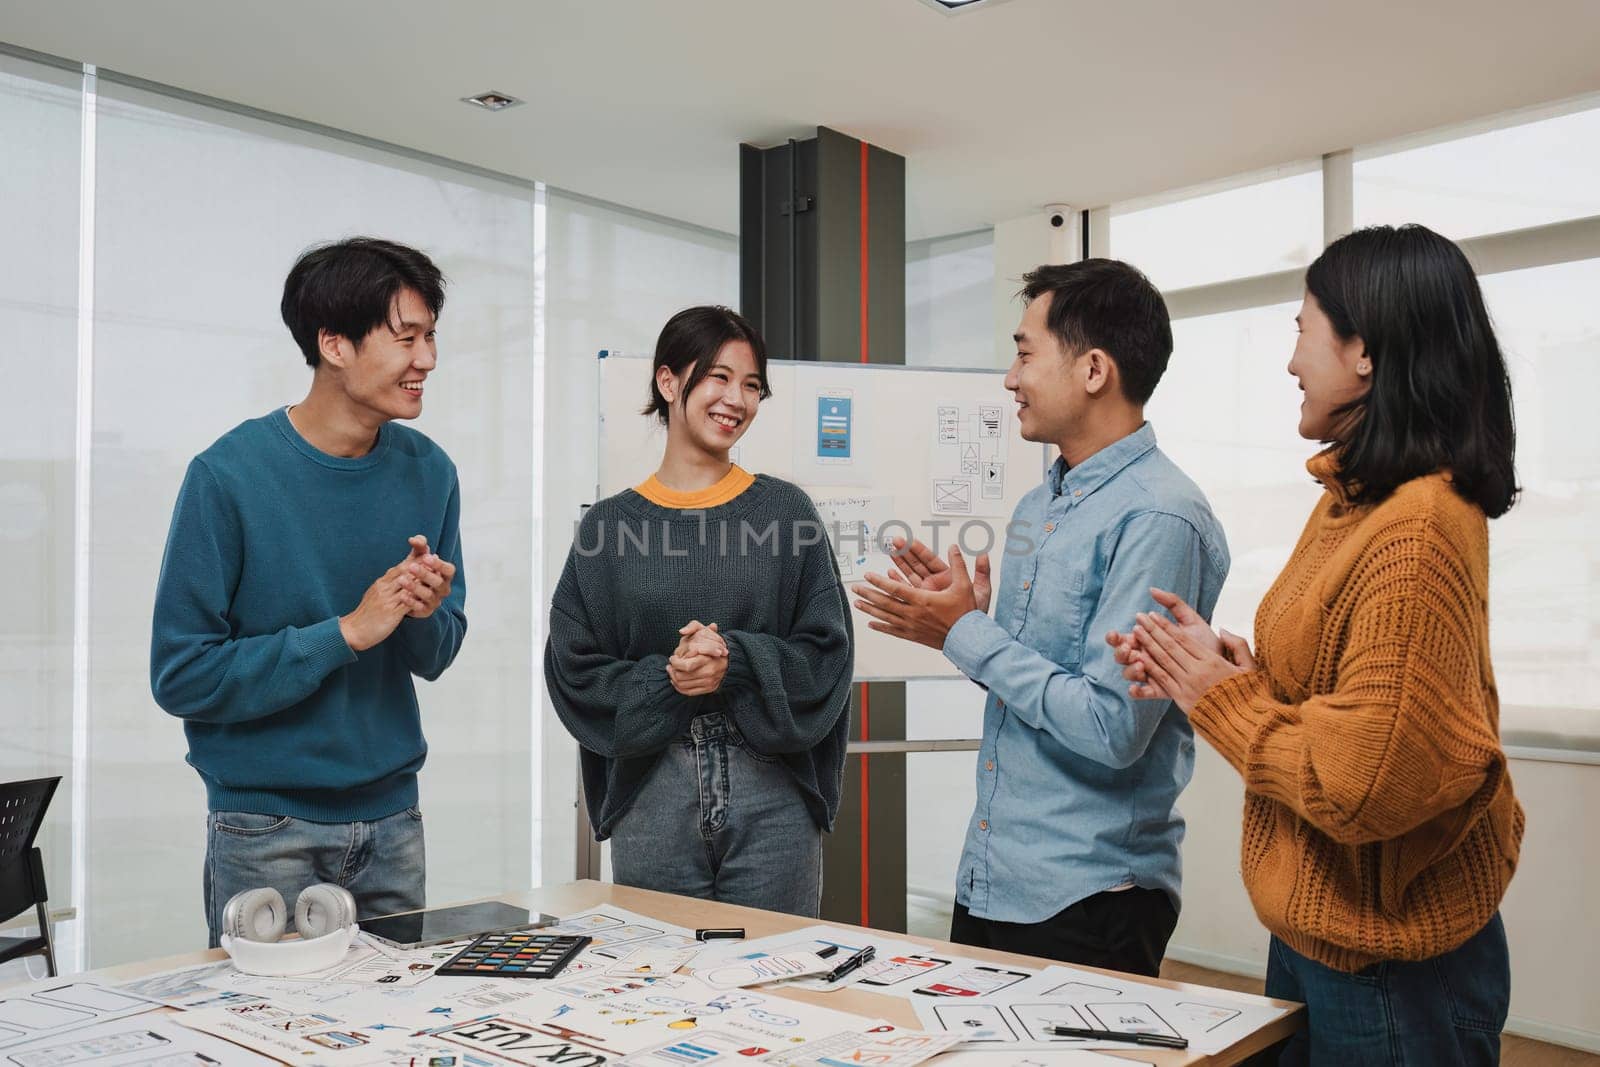 Team of ux developer and ui designer brainstorming interface wireframe design.Creative digital development agency by itchaznong